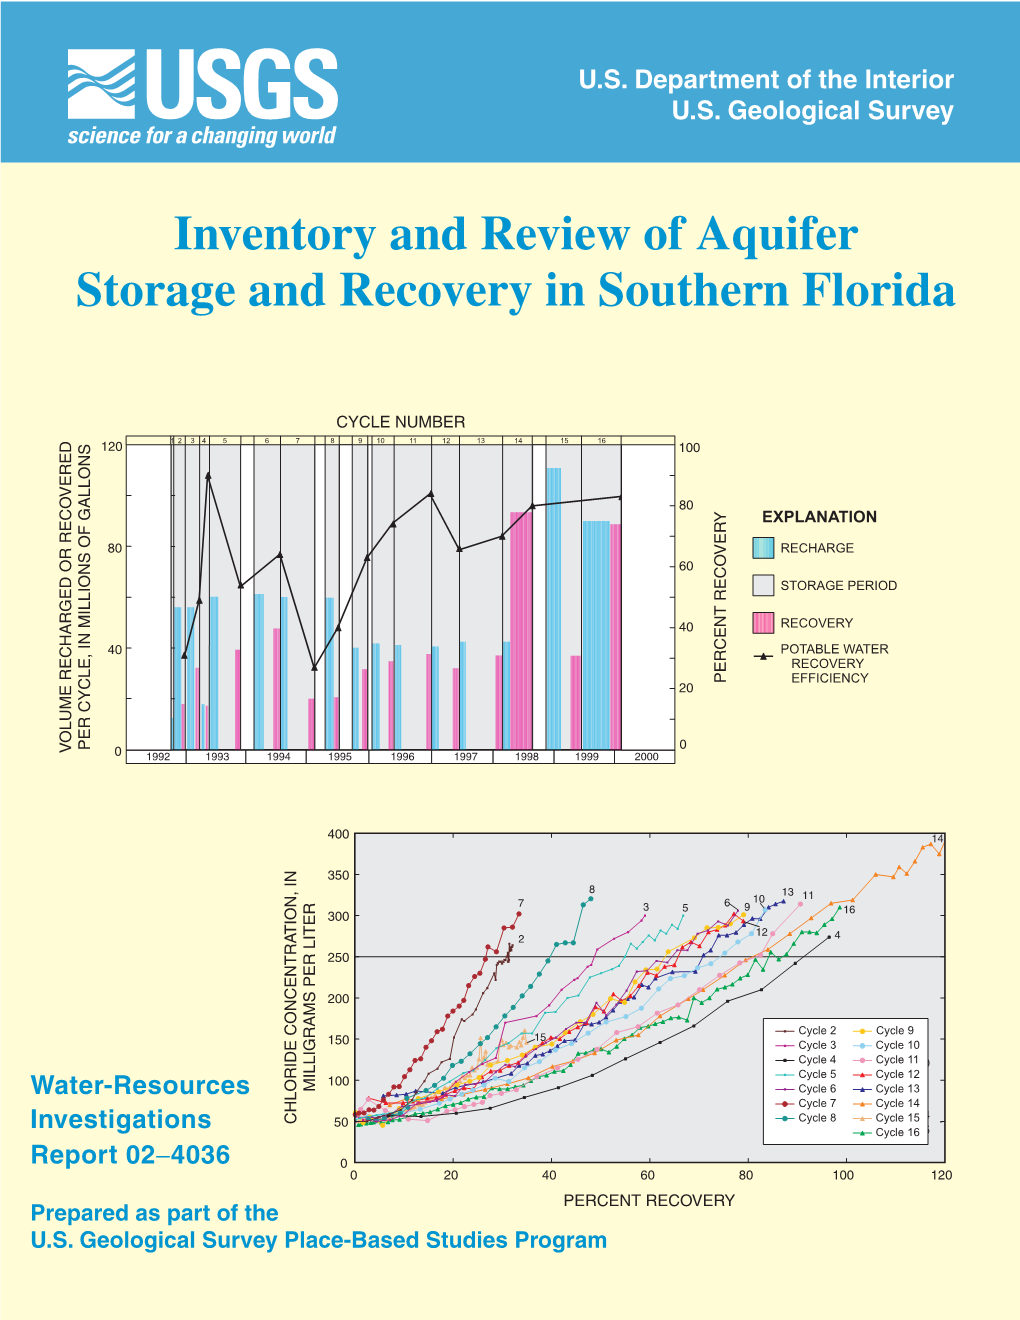 Inventory and Review of Aquifer Storage and Recovery in Southern Florida